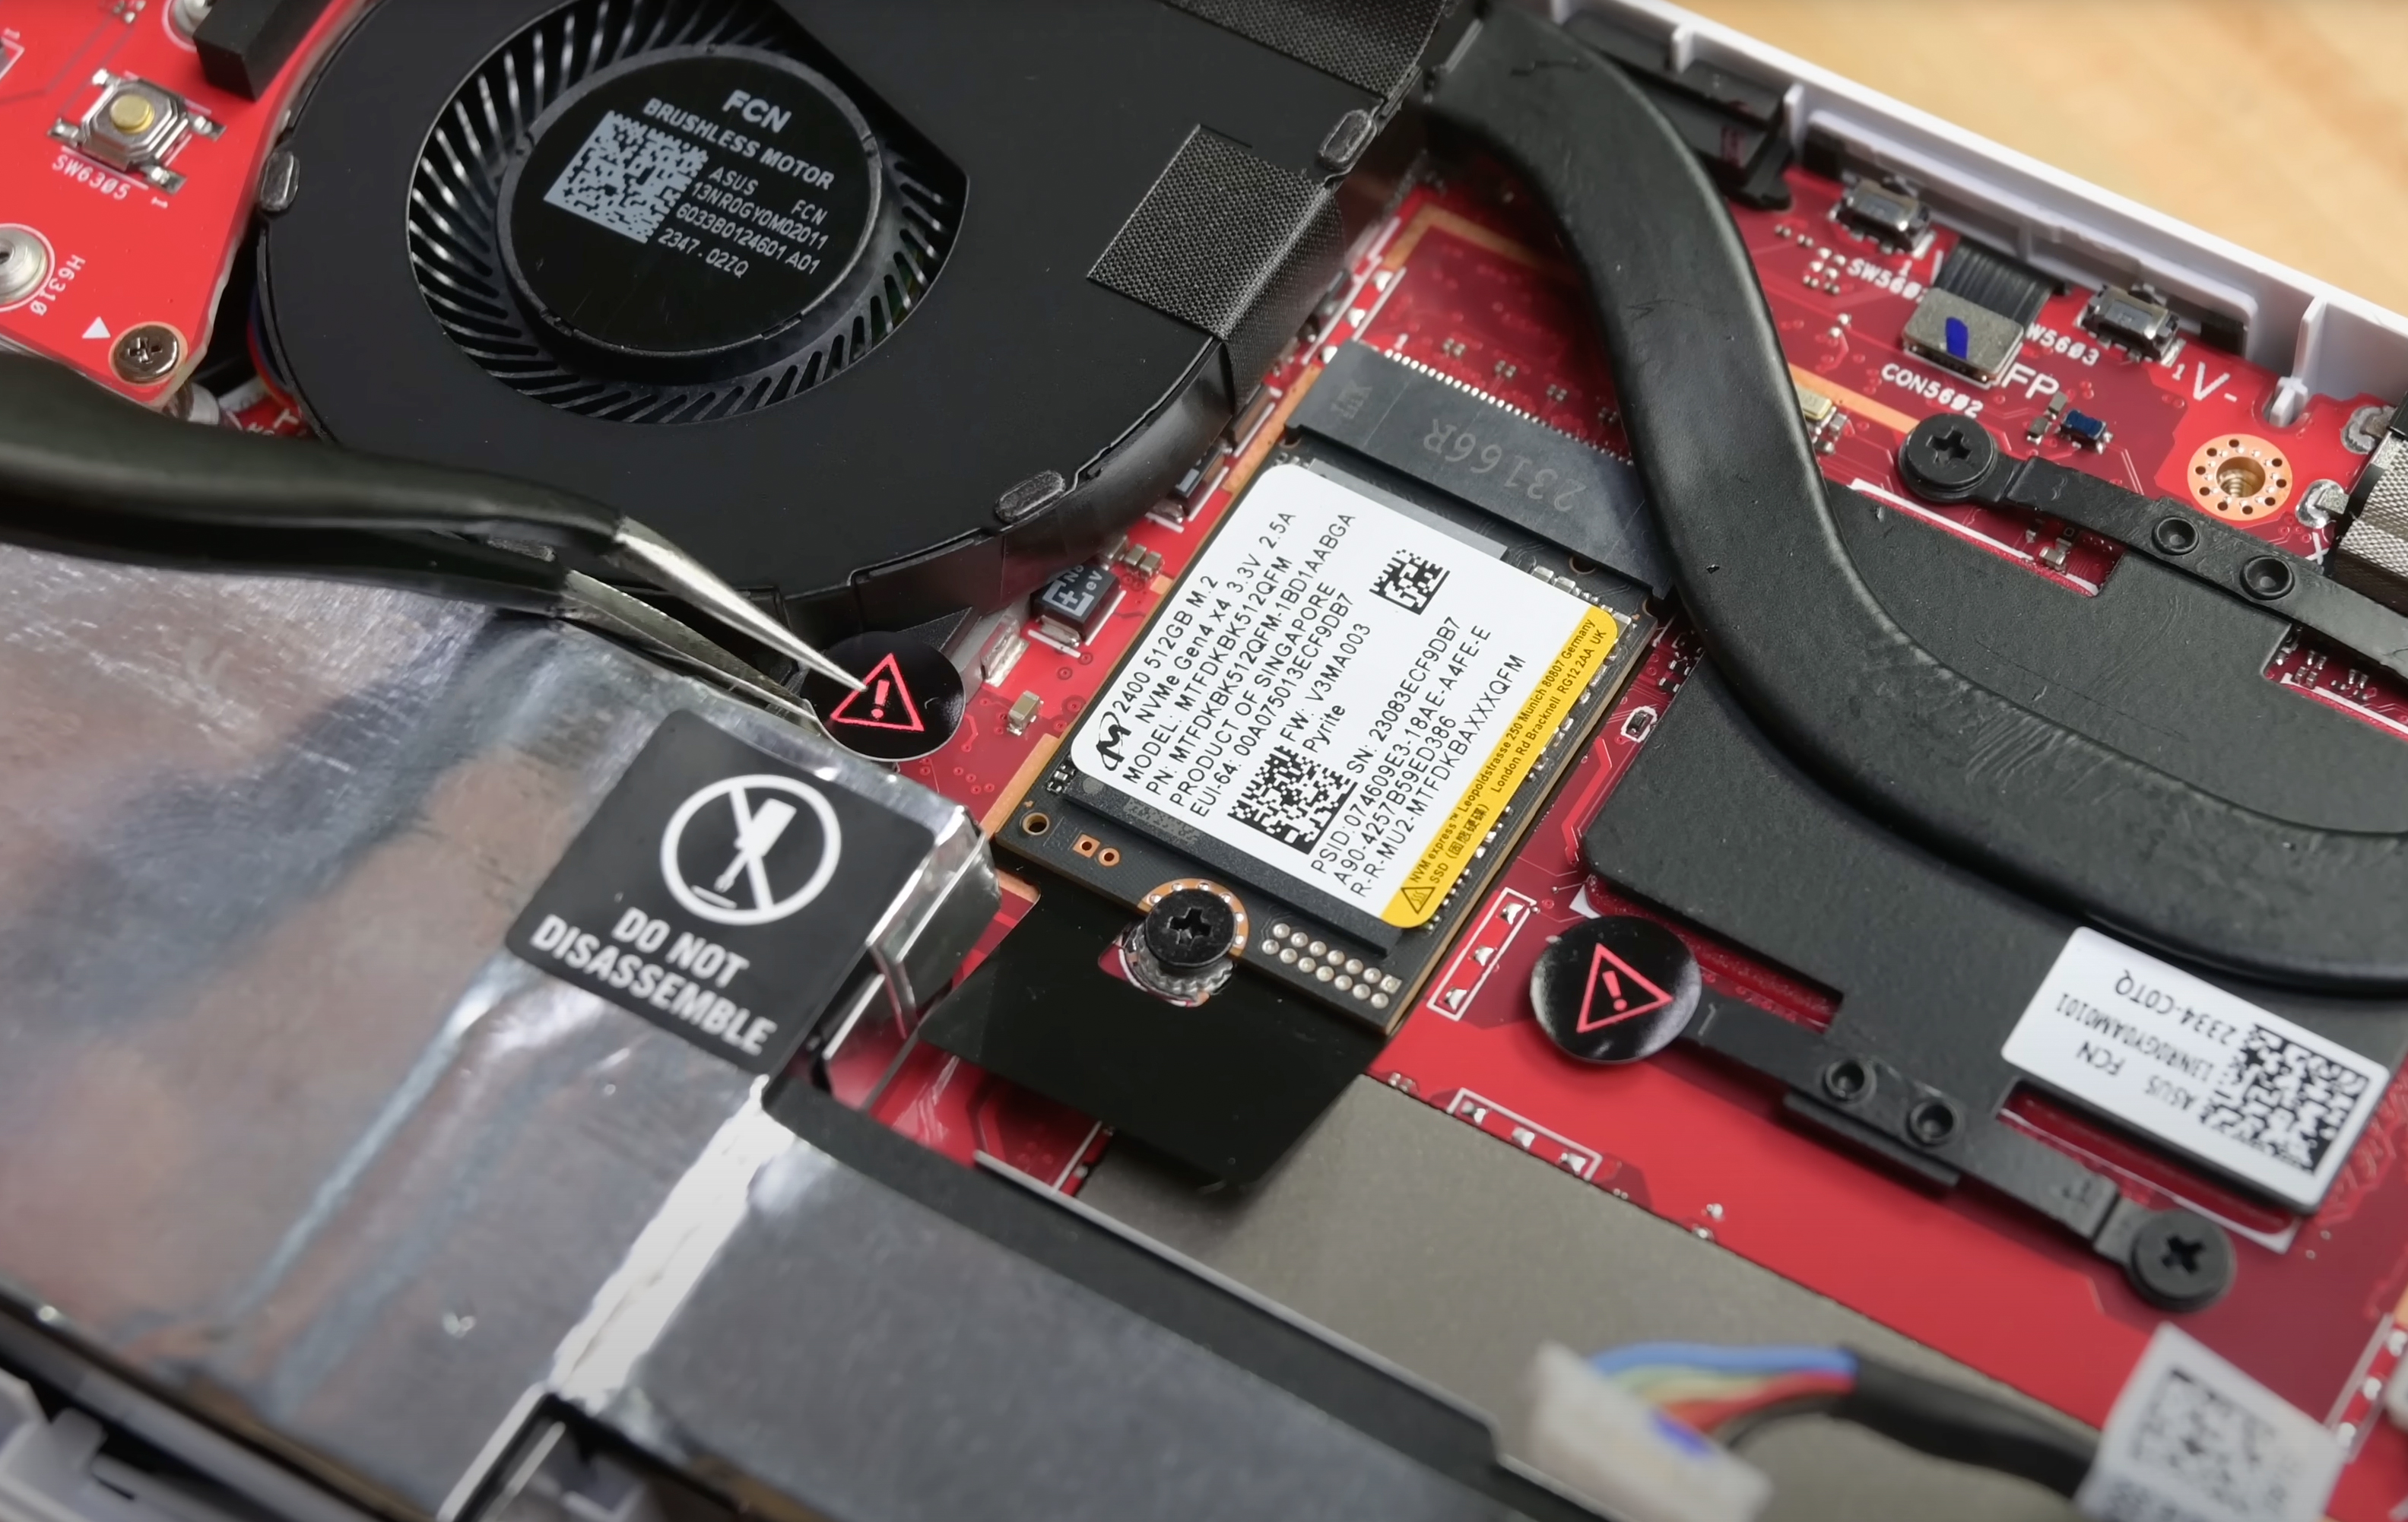 Modders Equip Asus's ROG Ally with 4 TB M.2 2280 SSD